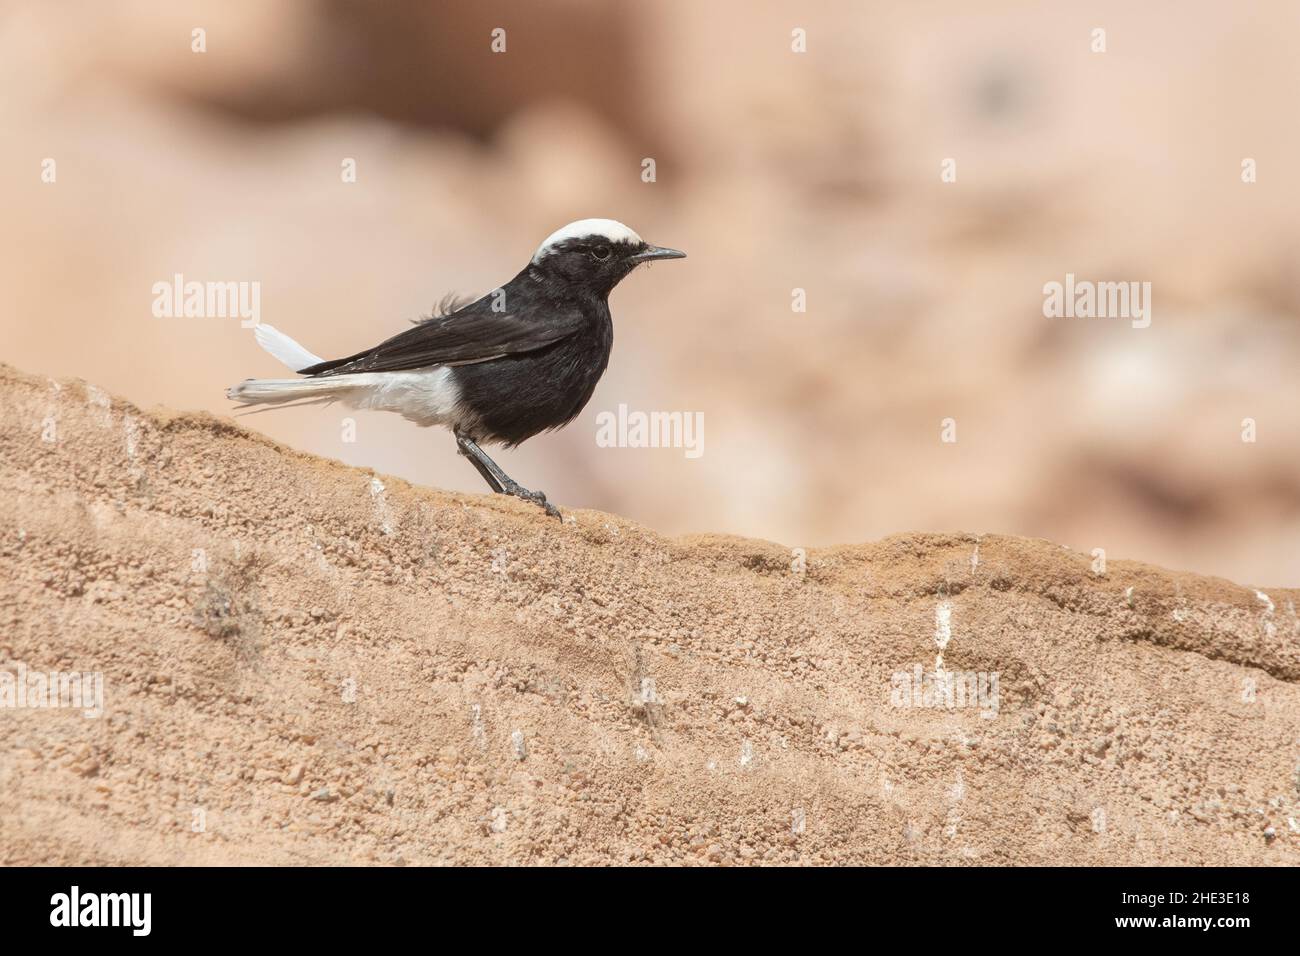 The white-crowned black wheatear (Oenanthe leucopyga) is a desert flycatcher found in the middle east and northern Africa - this one is from Egypt. Stock Photo